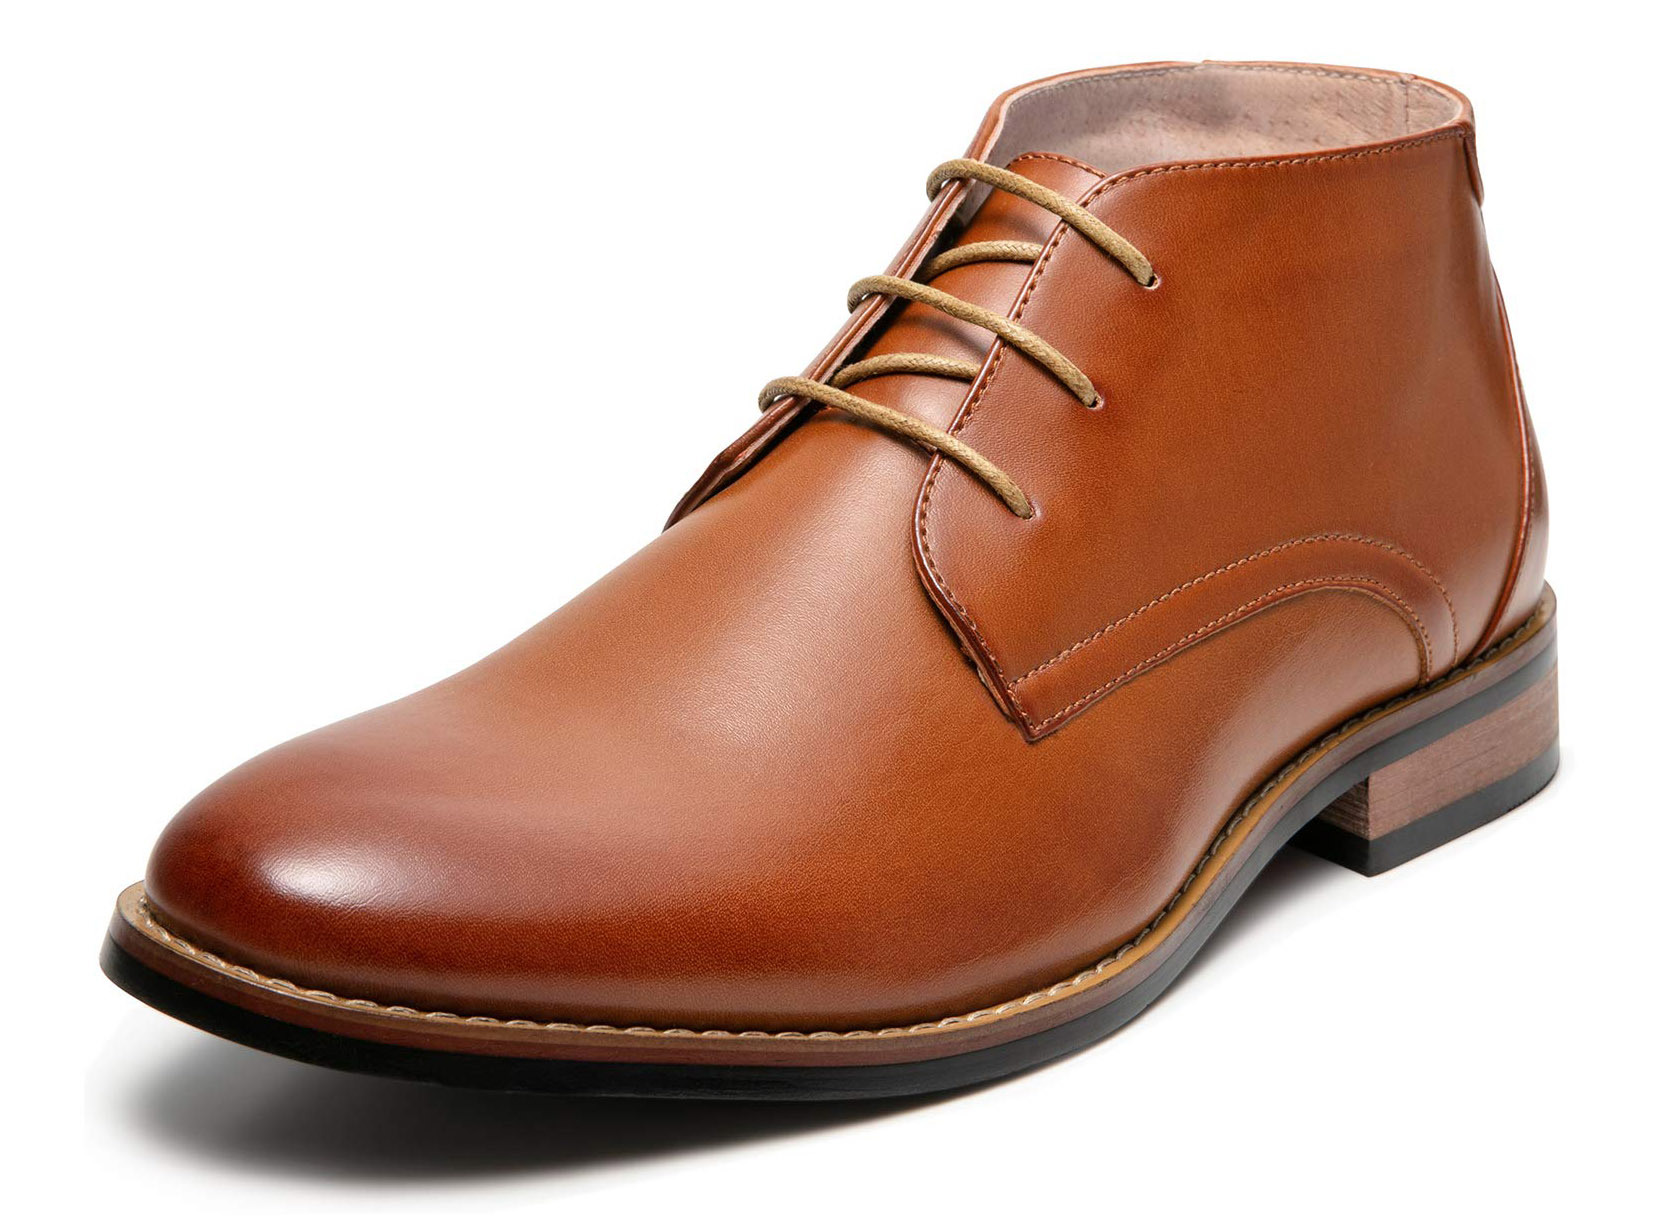 best inexpensive dress shoes